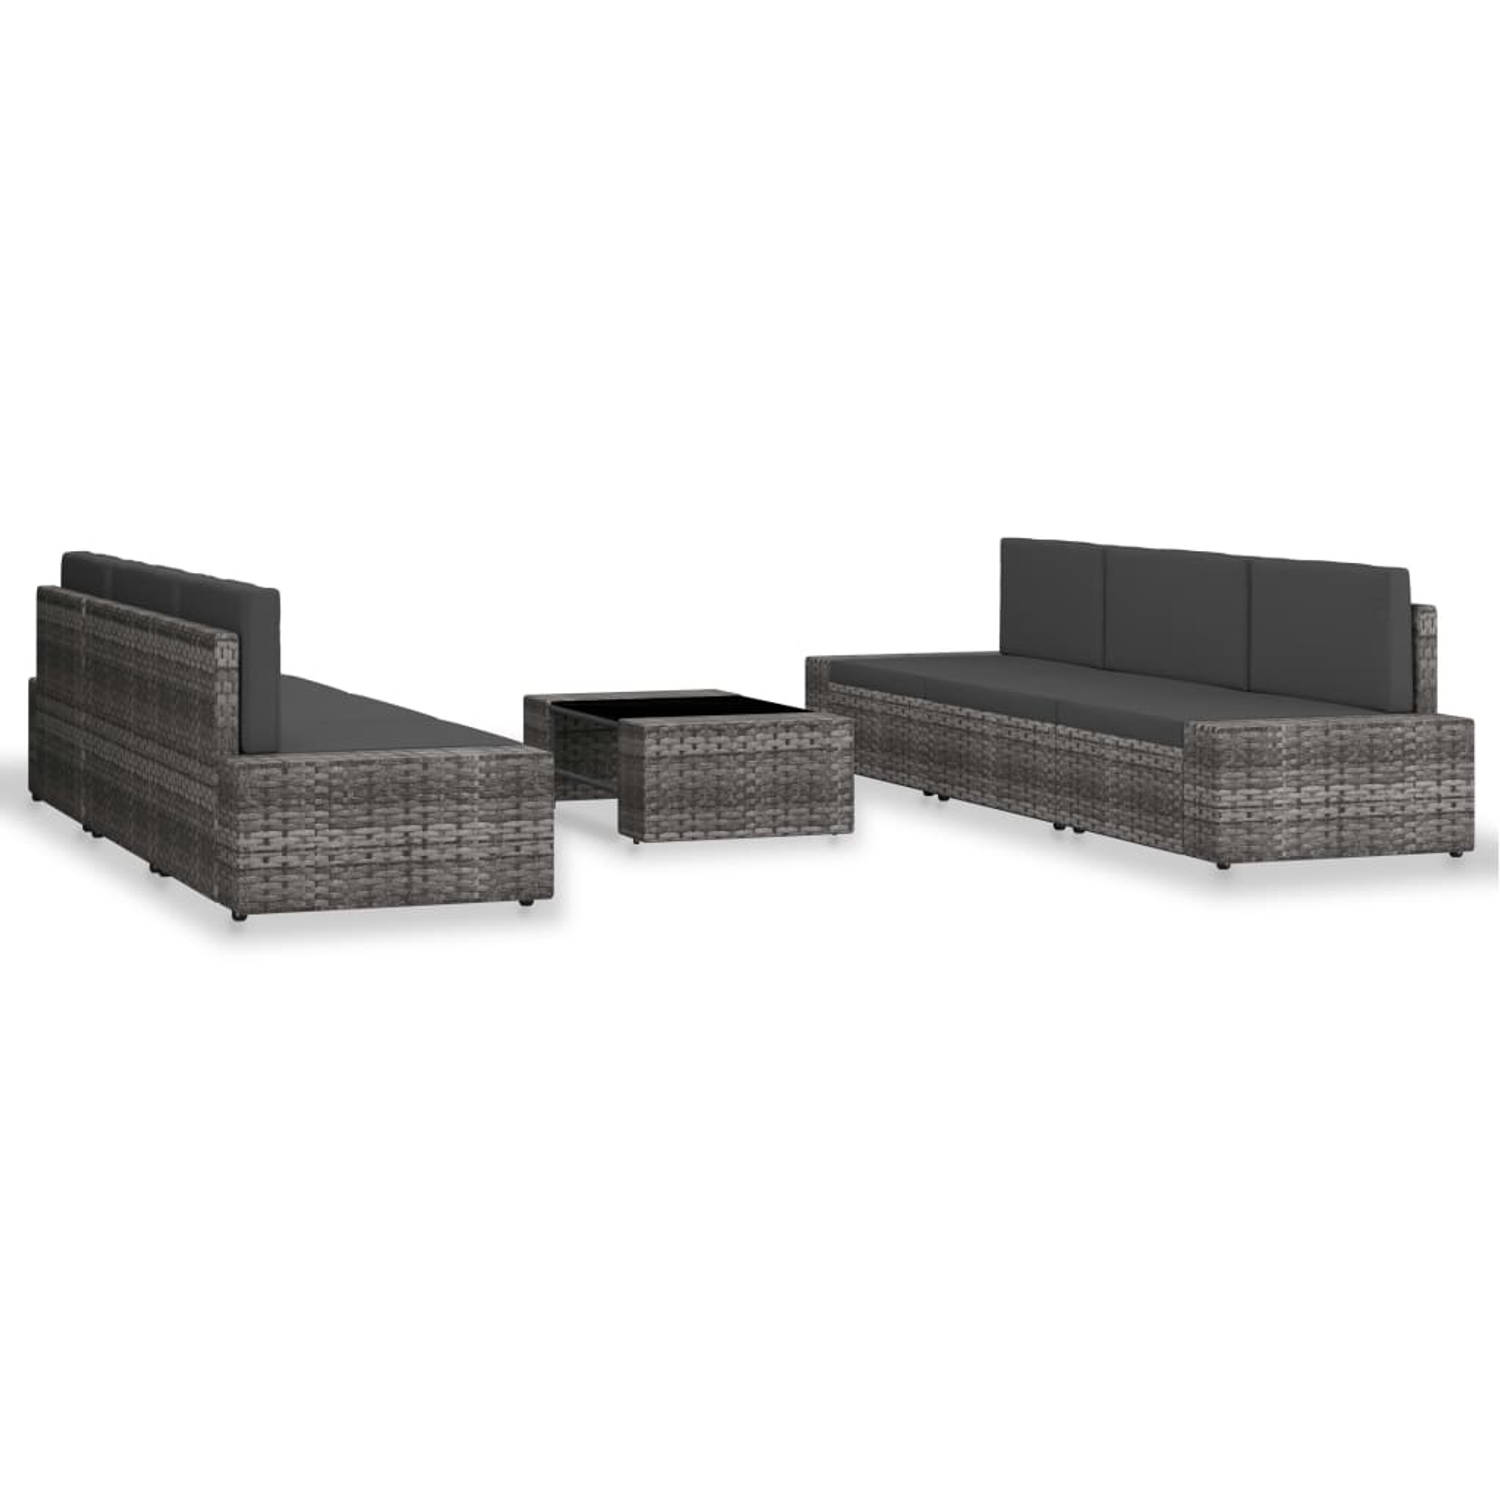 The Living Store Loungeset Poly Rattan - Grijs/Antraciet - 8-delig